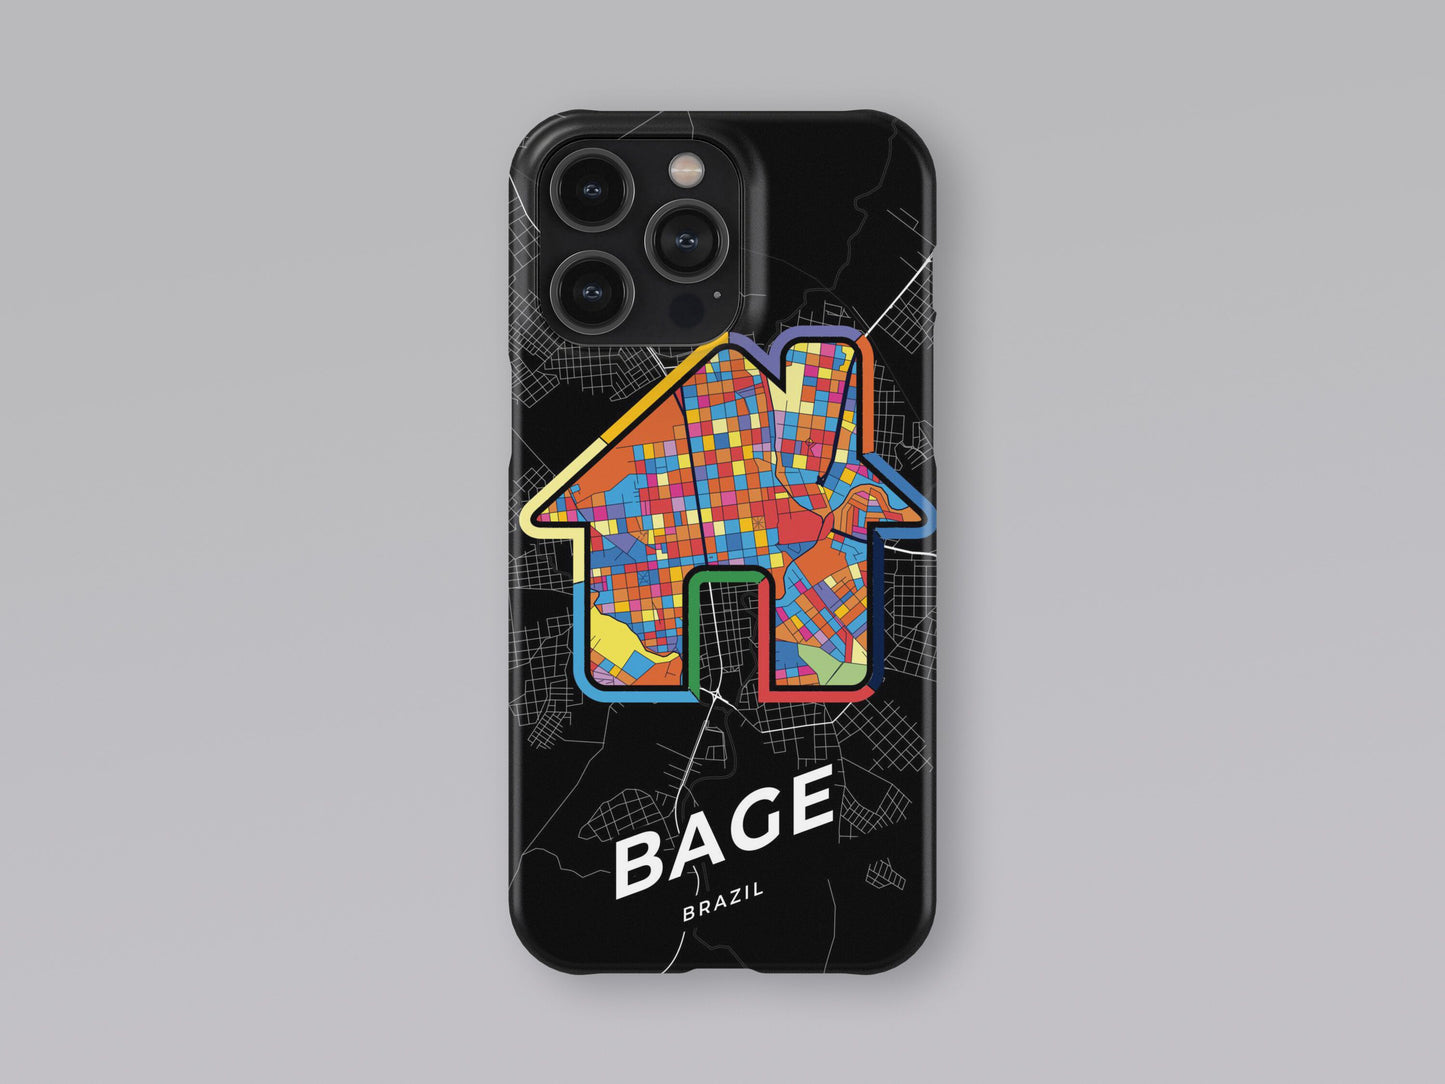 Bage Brazil slim phone case with colorful icon. Birthday, wedding or housewarming gift. Couple match cases. 3